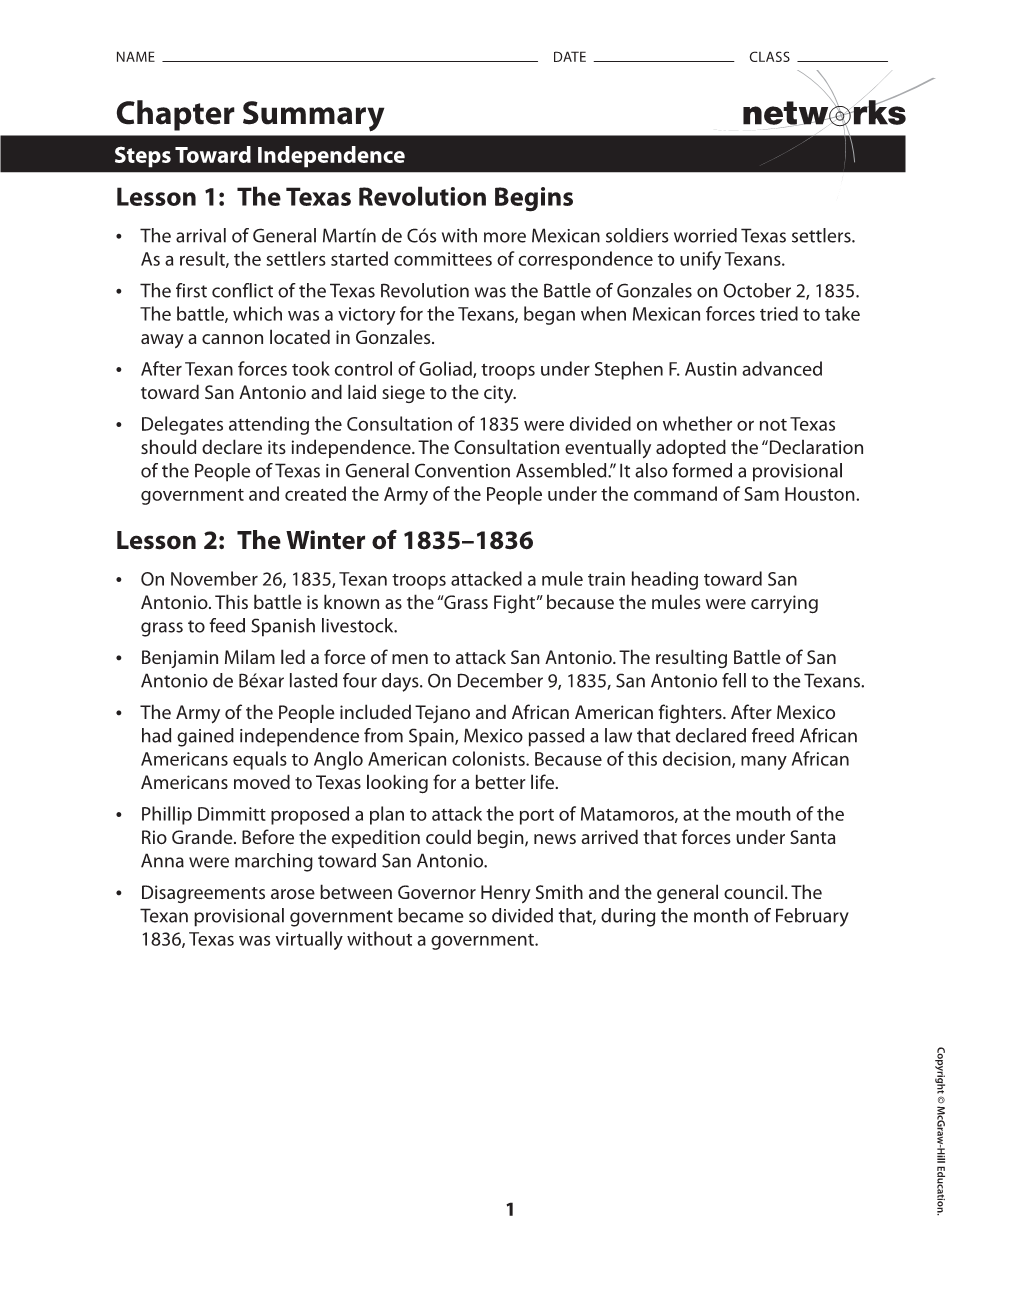 Chapter Summary Lesson 1: the Texas Revolution Begins